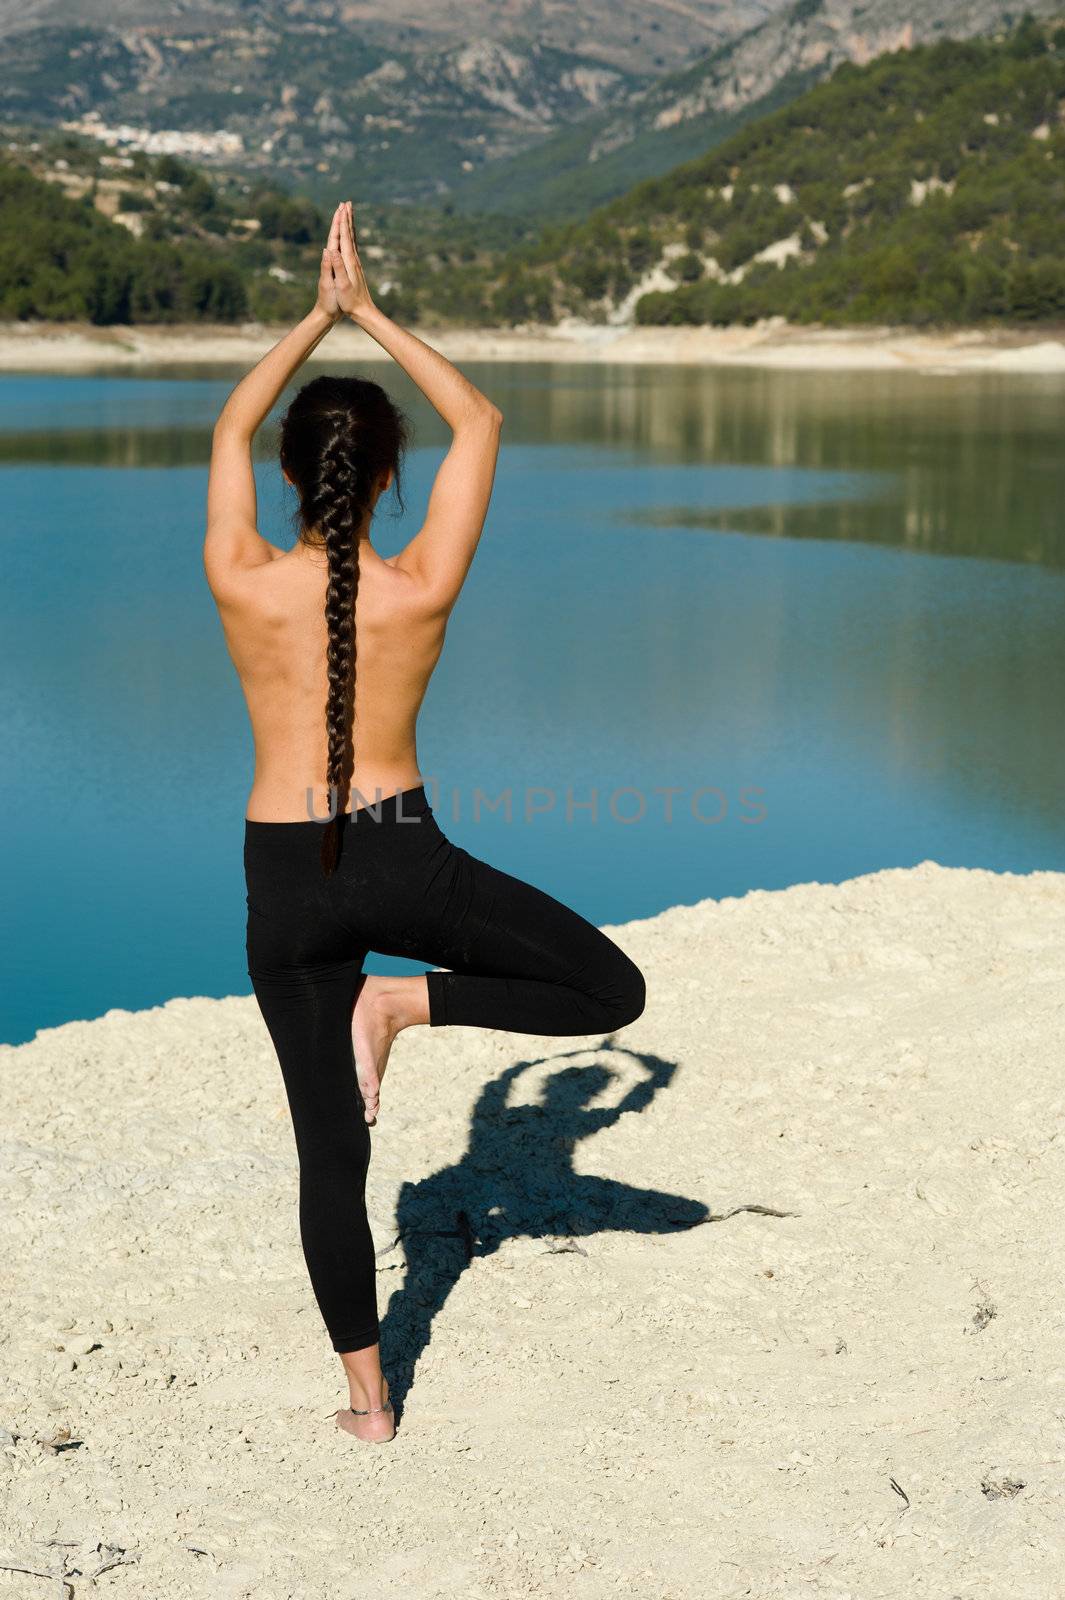 Early morning yoga at a scenic lakeside setting